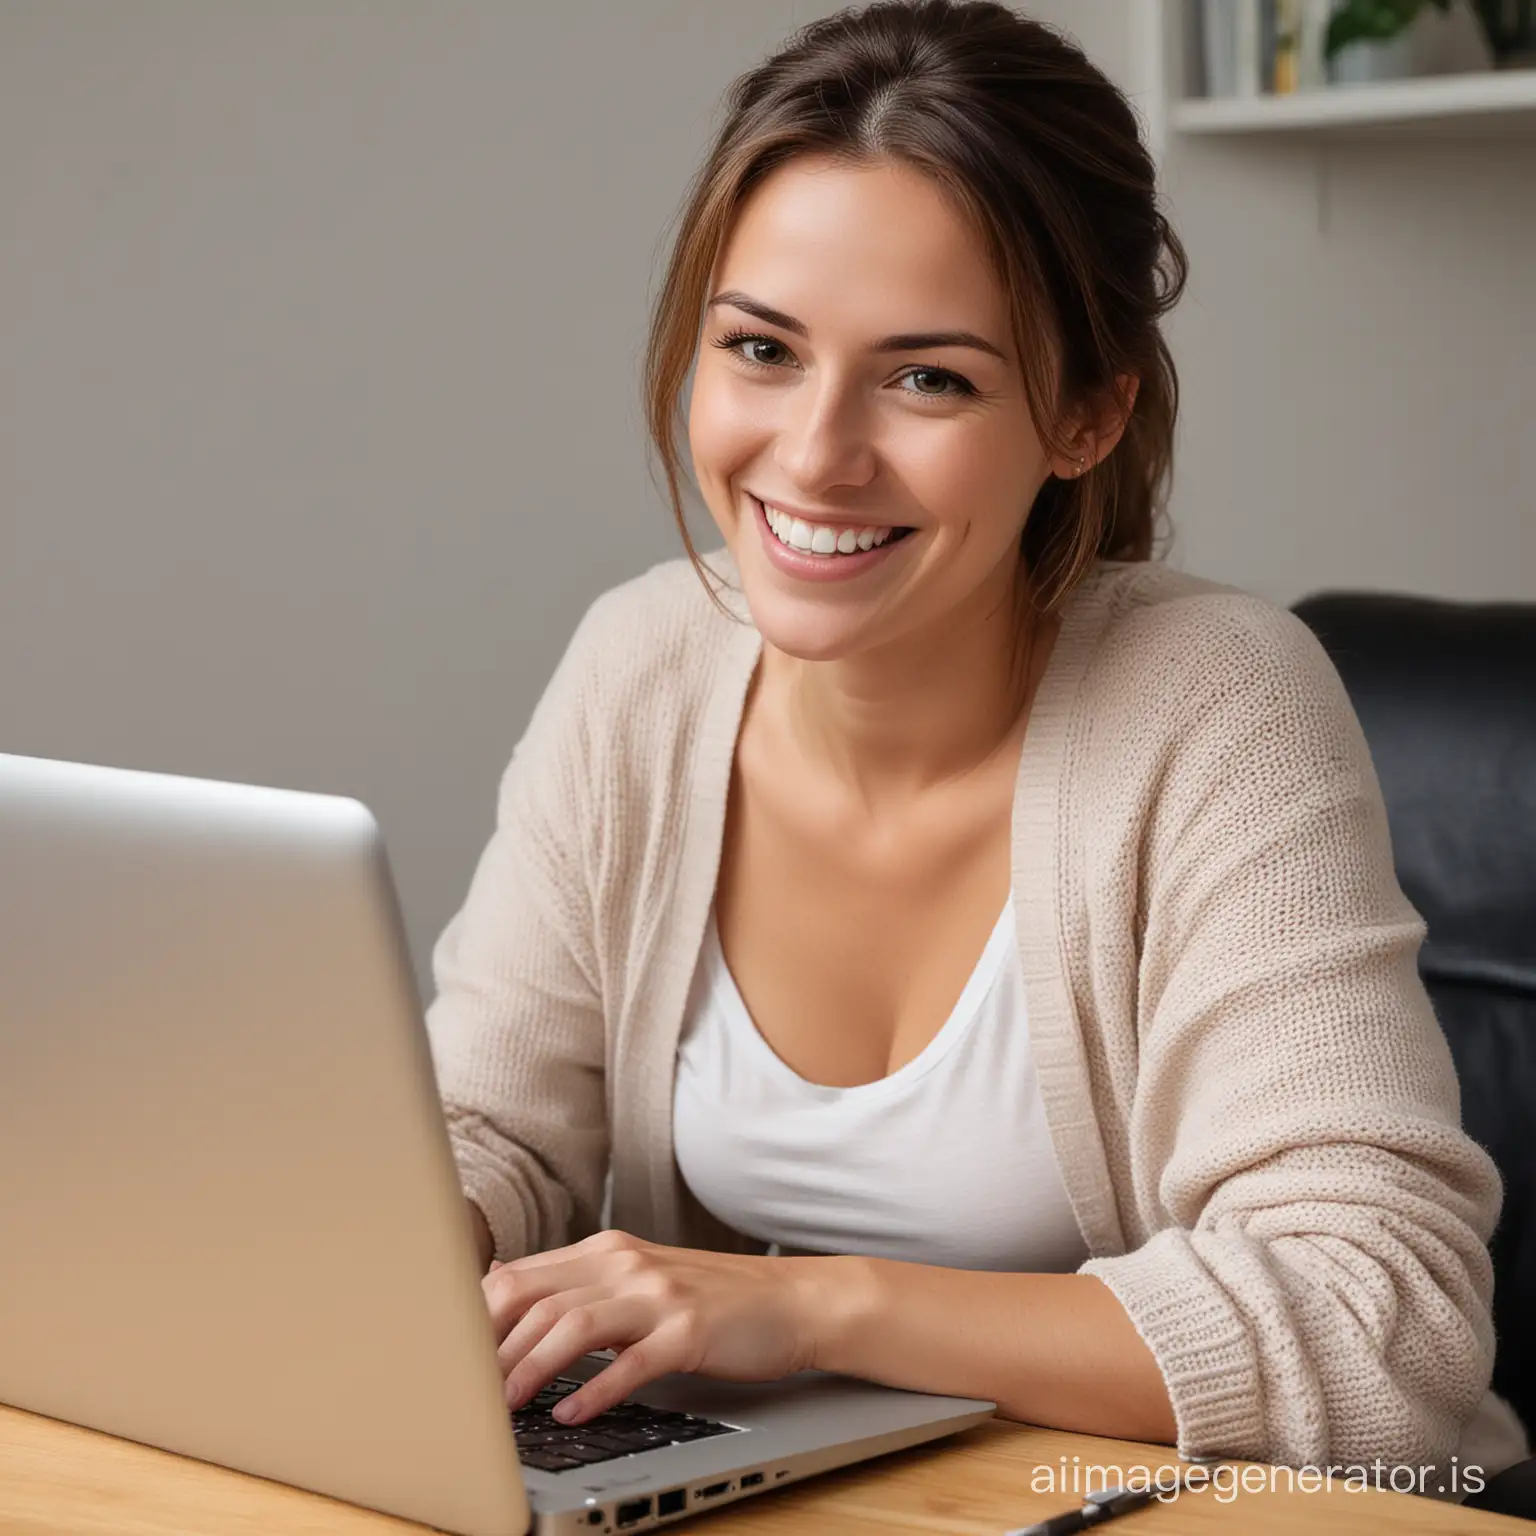 A young Mother working on her lap top computer  showing a smile and being very happy